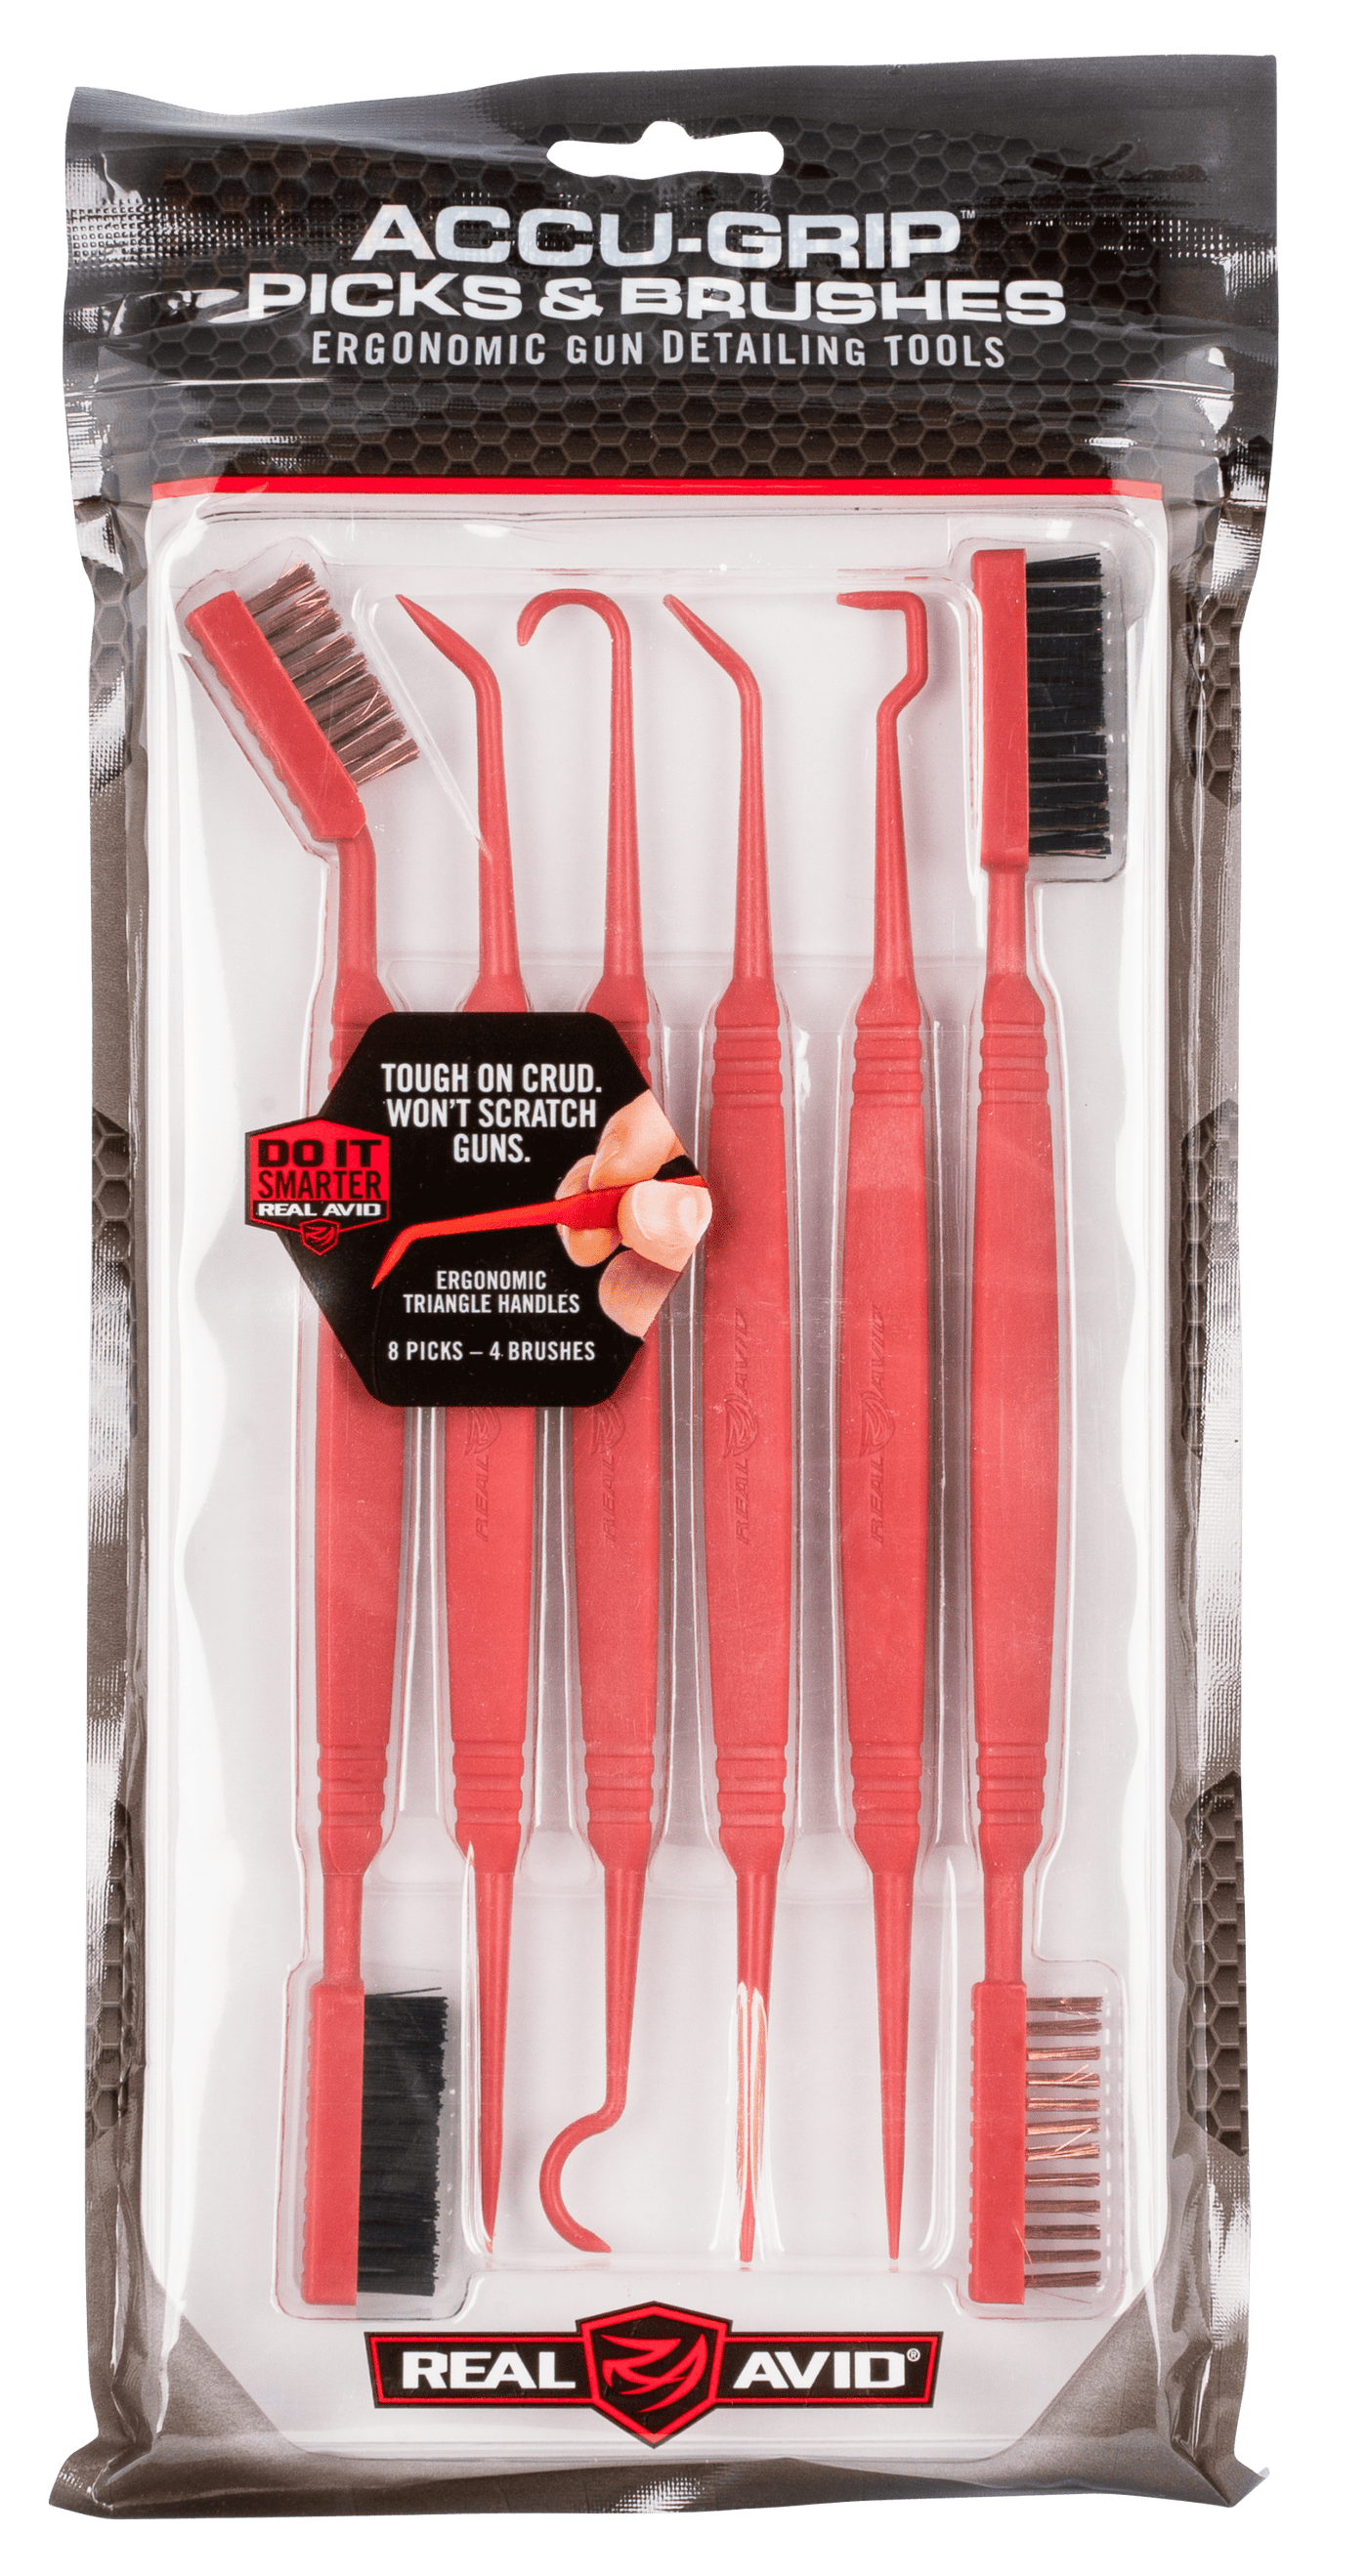 Real Avid Real Avid Accu-grip Picks & - Brushes W/ Triangular Handles Cleaning And Gun Care